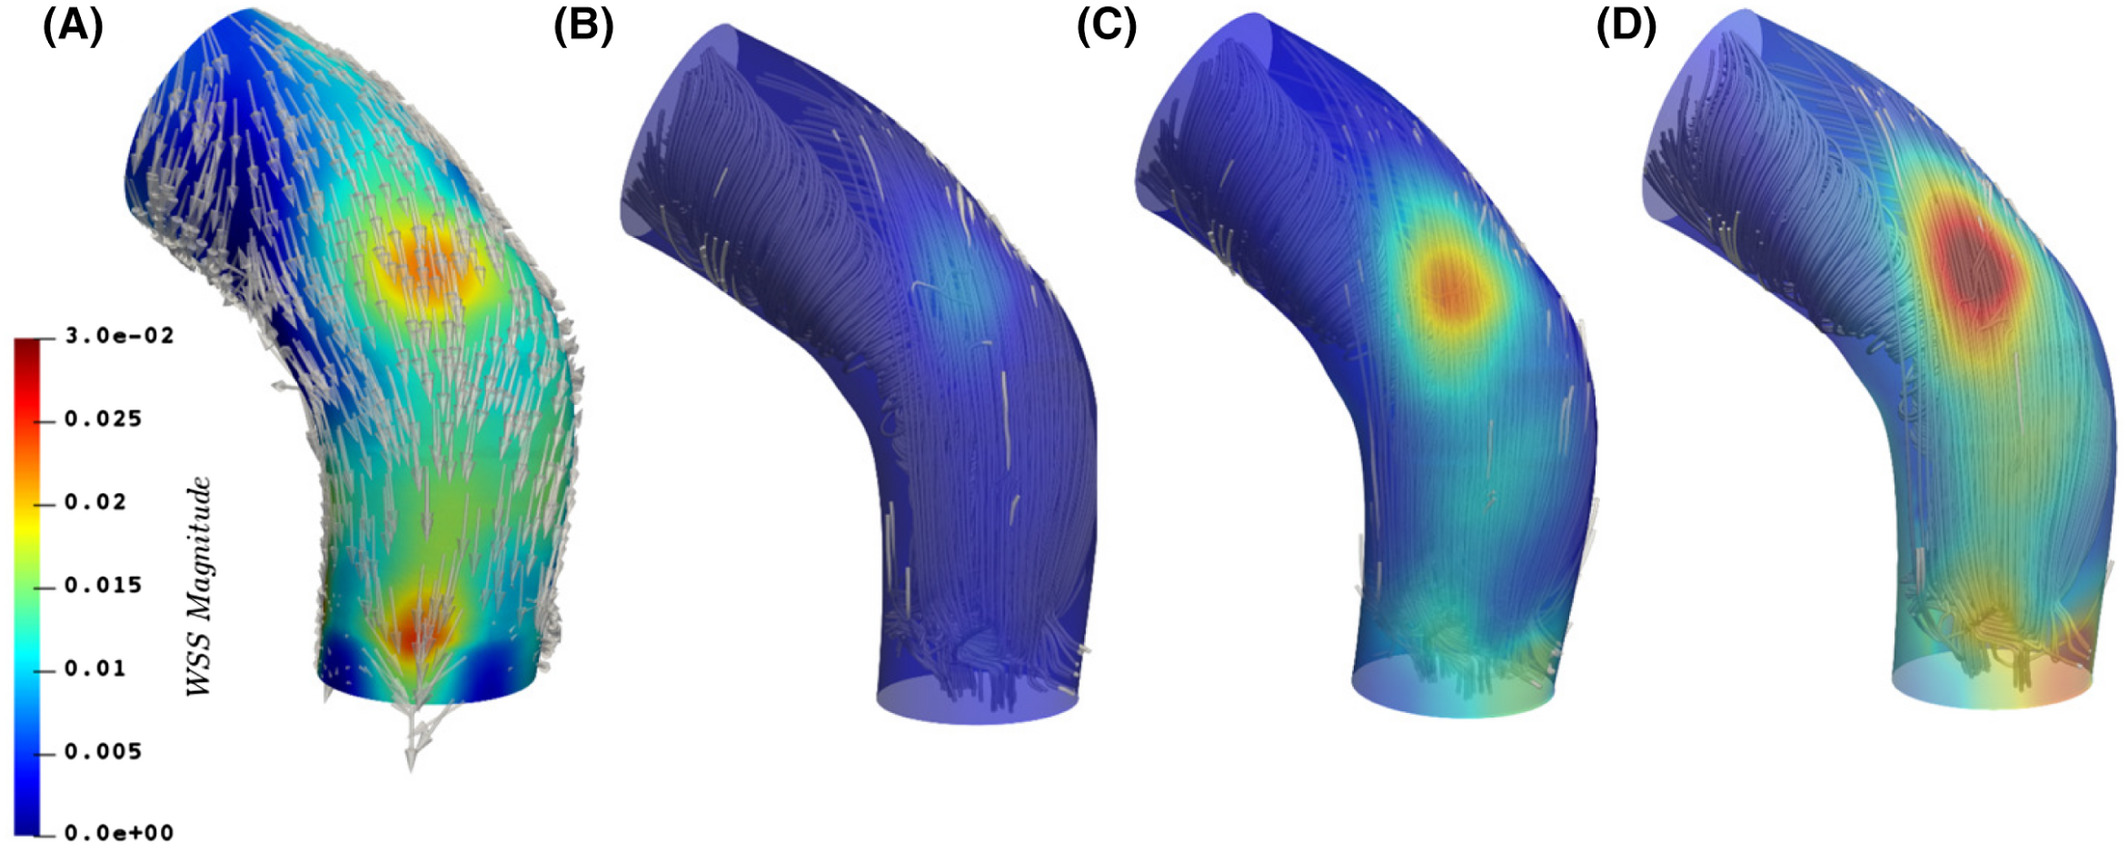 Magnitude of wall shear stress from the posterior view obtained A, from DNS complemented with the arrow representation of the WSS vector at the aorta wall; B, from MRI data using the direct and formal definition of WSS; C, using the first model M1 for the evaluation from MRI measurements; D, using the second model M2 for the MRI-based assessment.